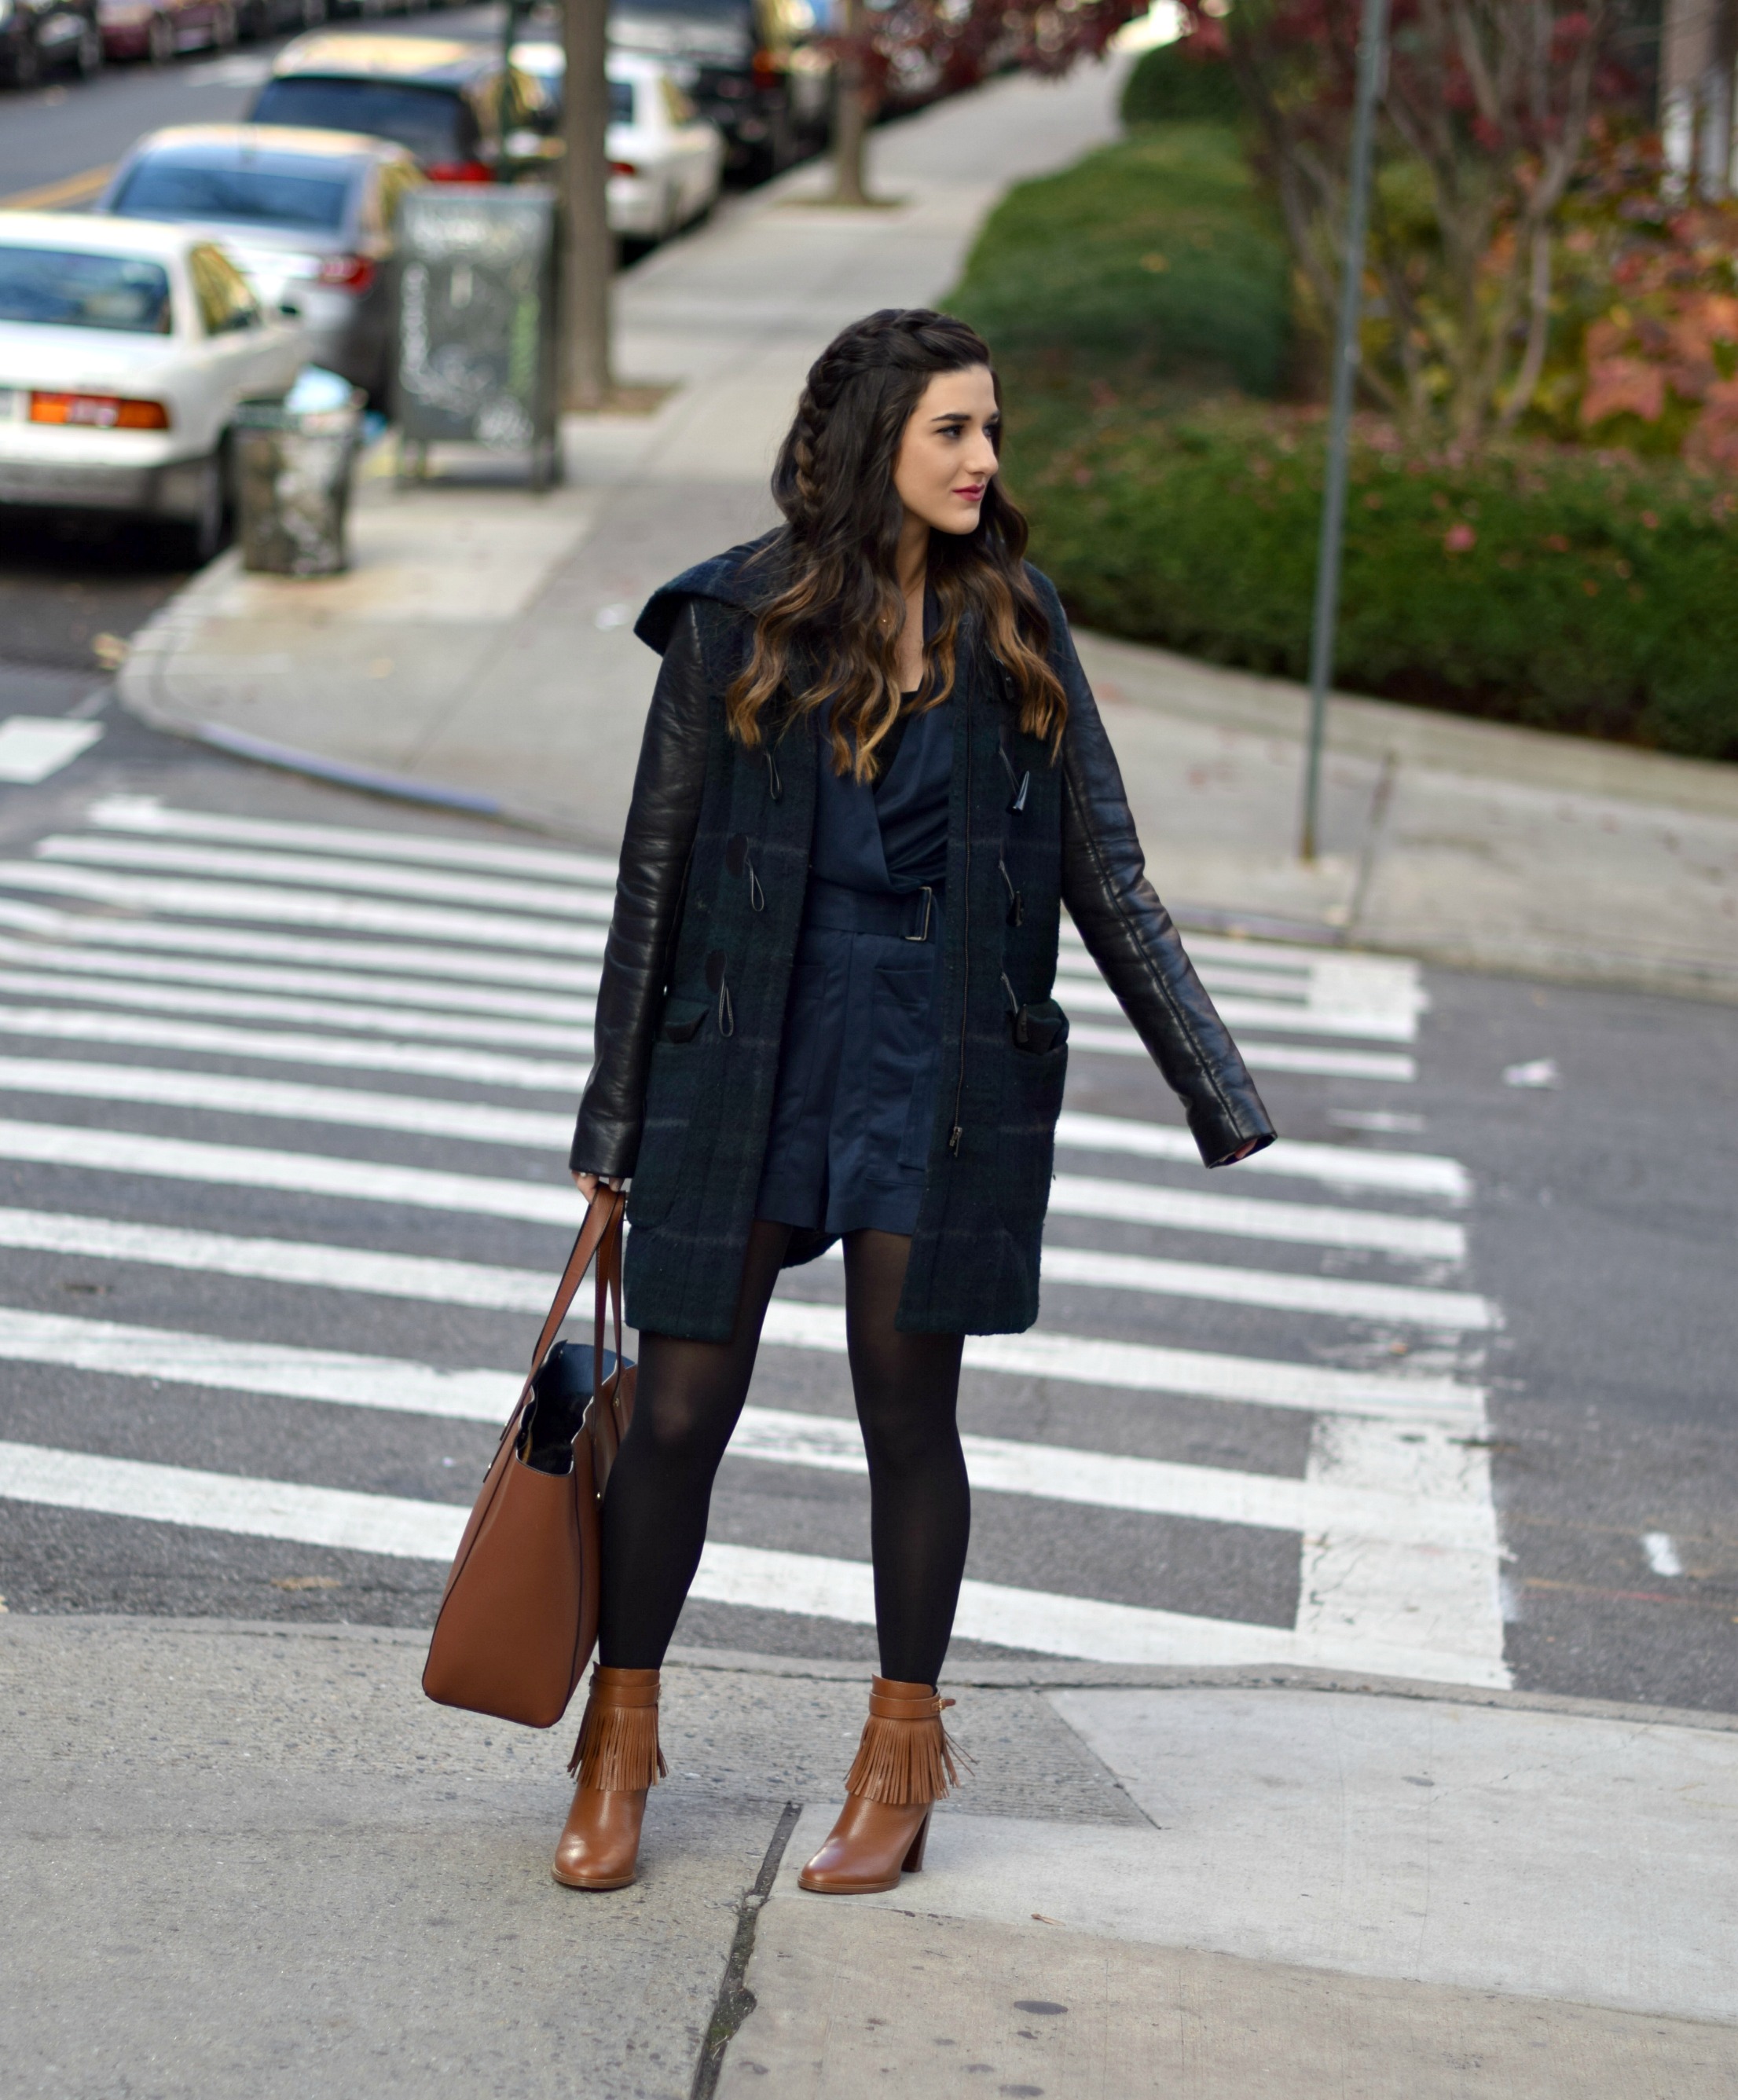 Navy Romper Fringe Booties Louboutins & Love Fashion Blog Esther Santer NYC Street Style Blogger Zara Plaid Coat Leather Sleeves Girl Women OOTD Outfit Soho Tote Ivanka Trump Accessories Shoes Boots Winter Black Tights Braid Hair Inspo Jewelry Rings.jpg